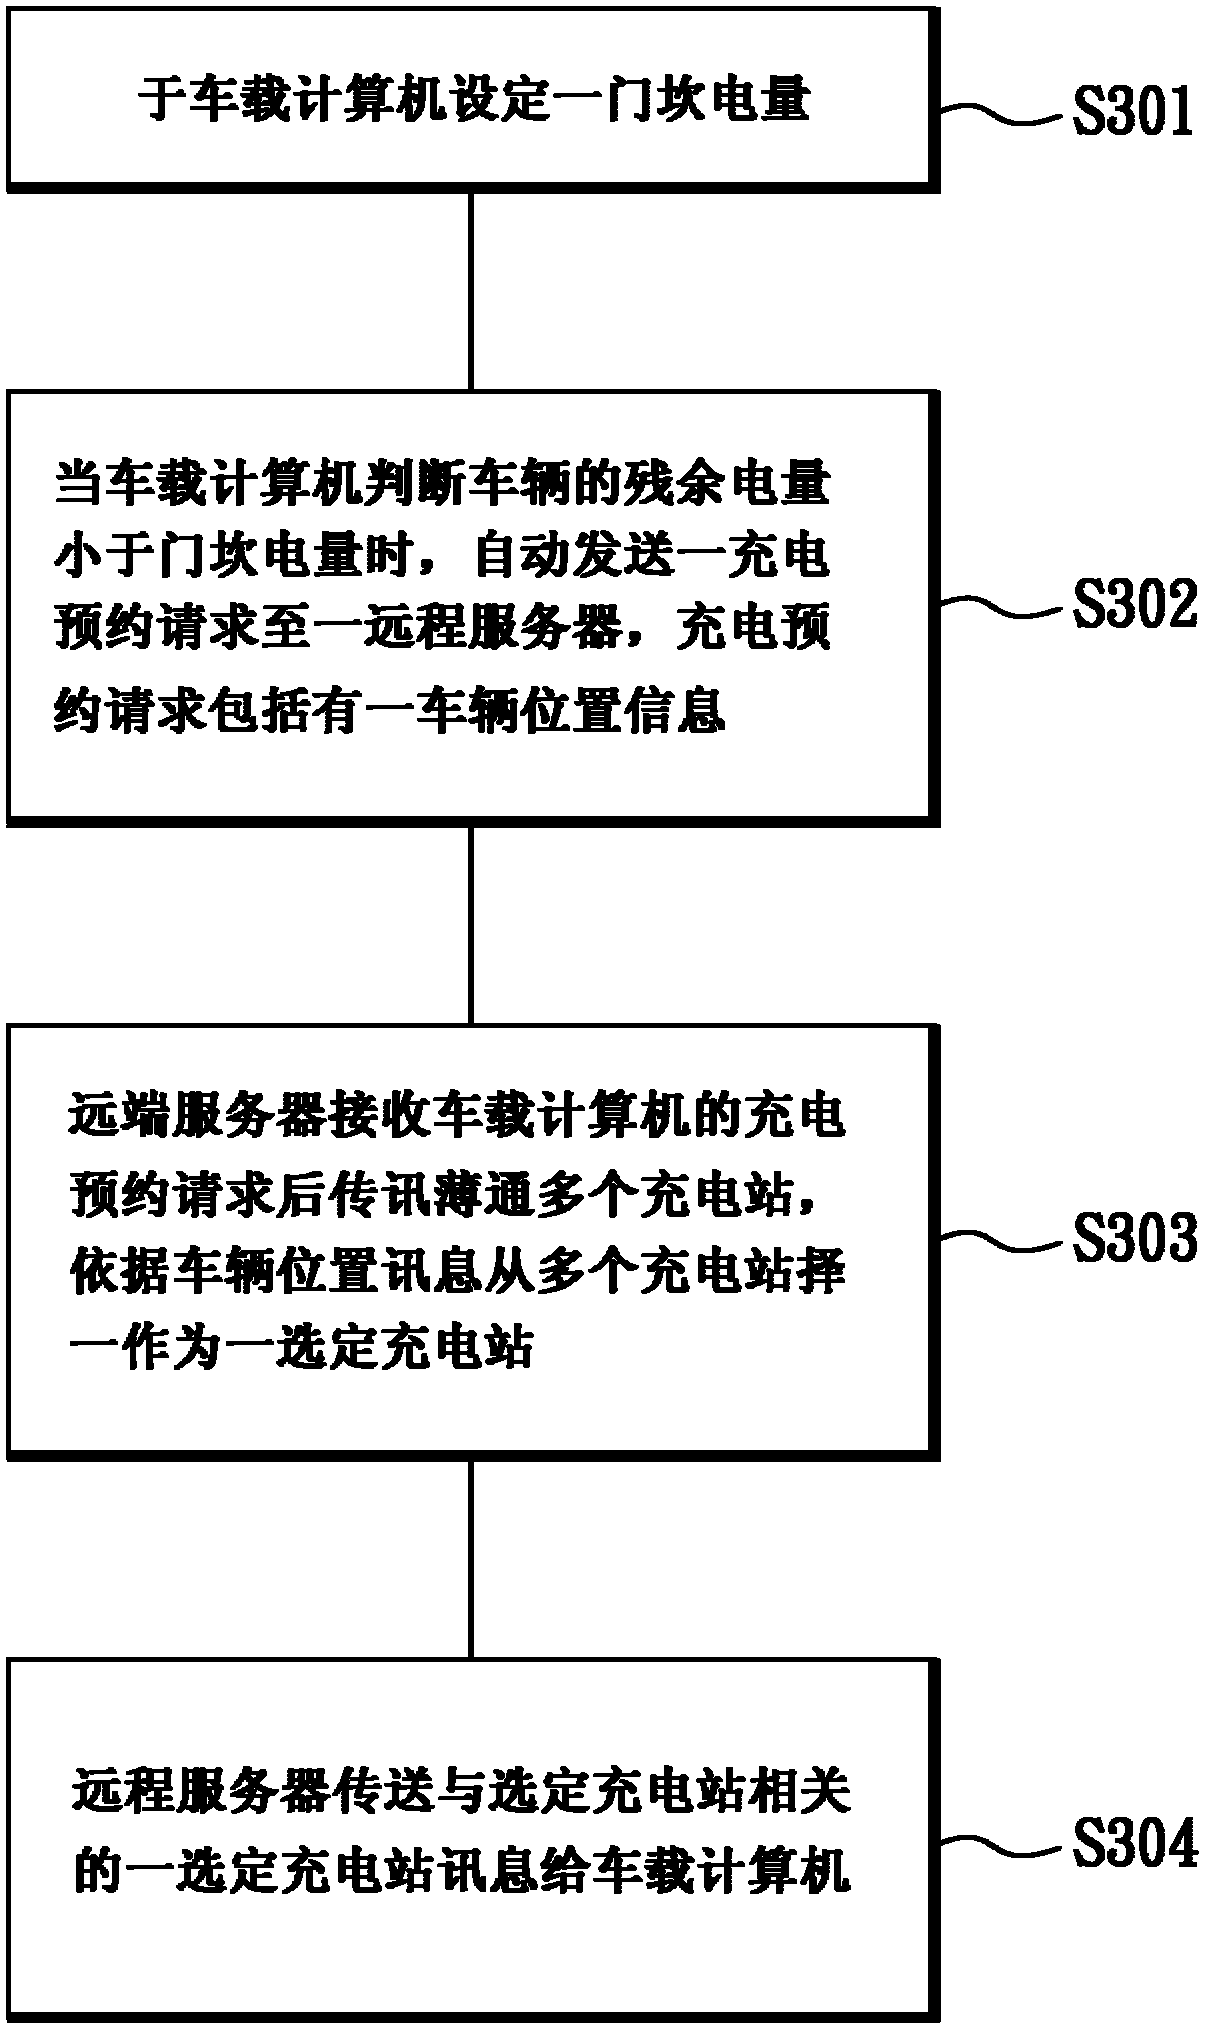 Method and system of vehicle charging booking